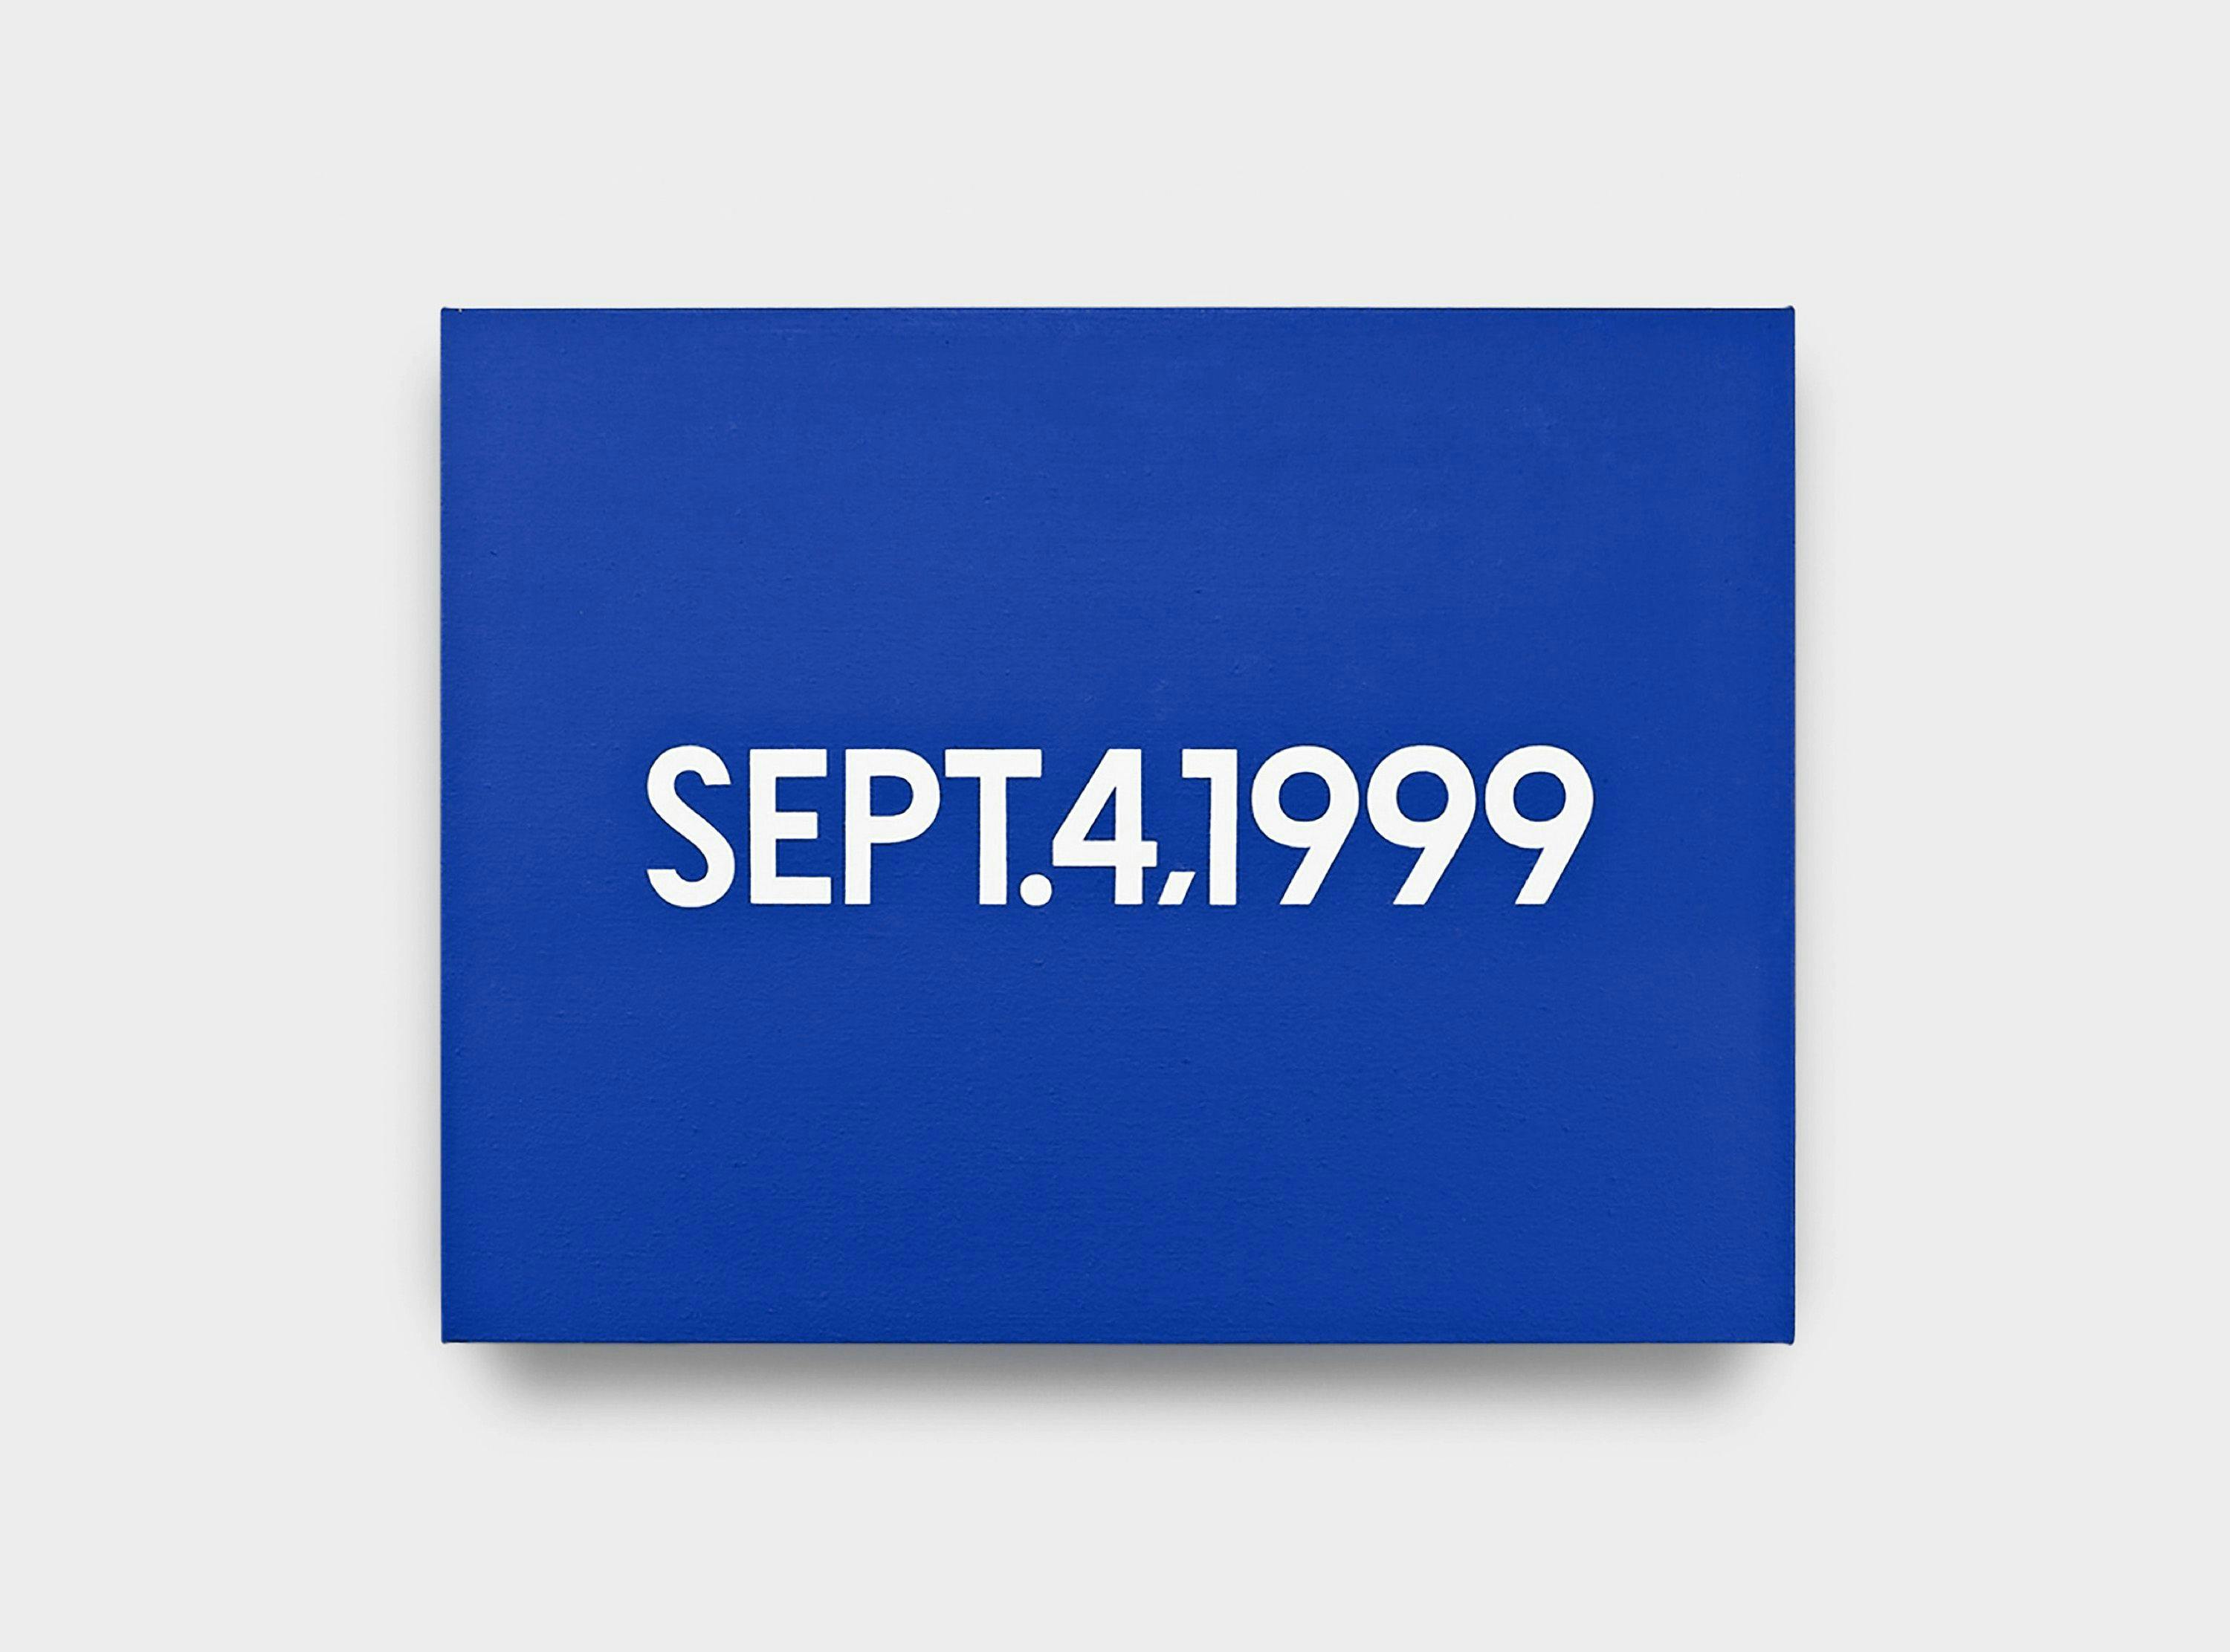 A painting by On Kawara, titled SEPT. 4, 1999, dated 1999.